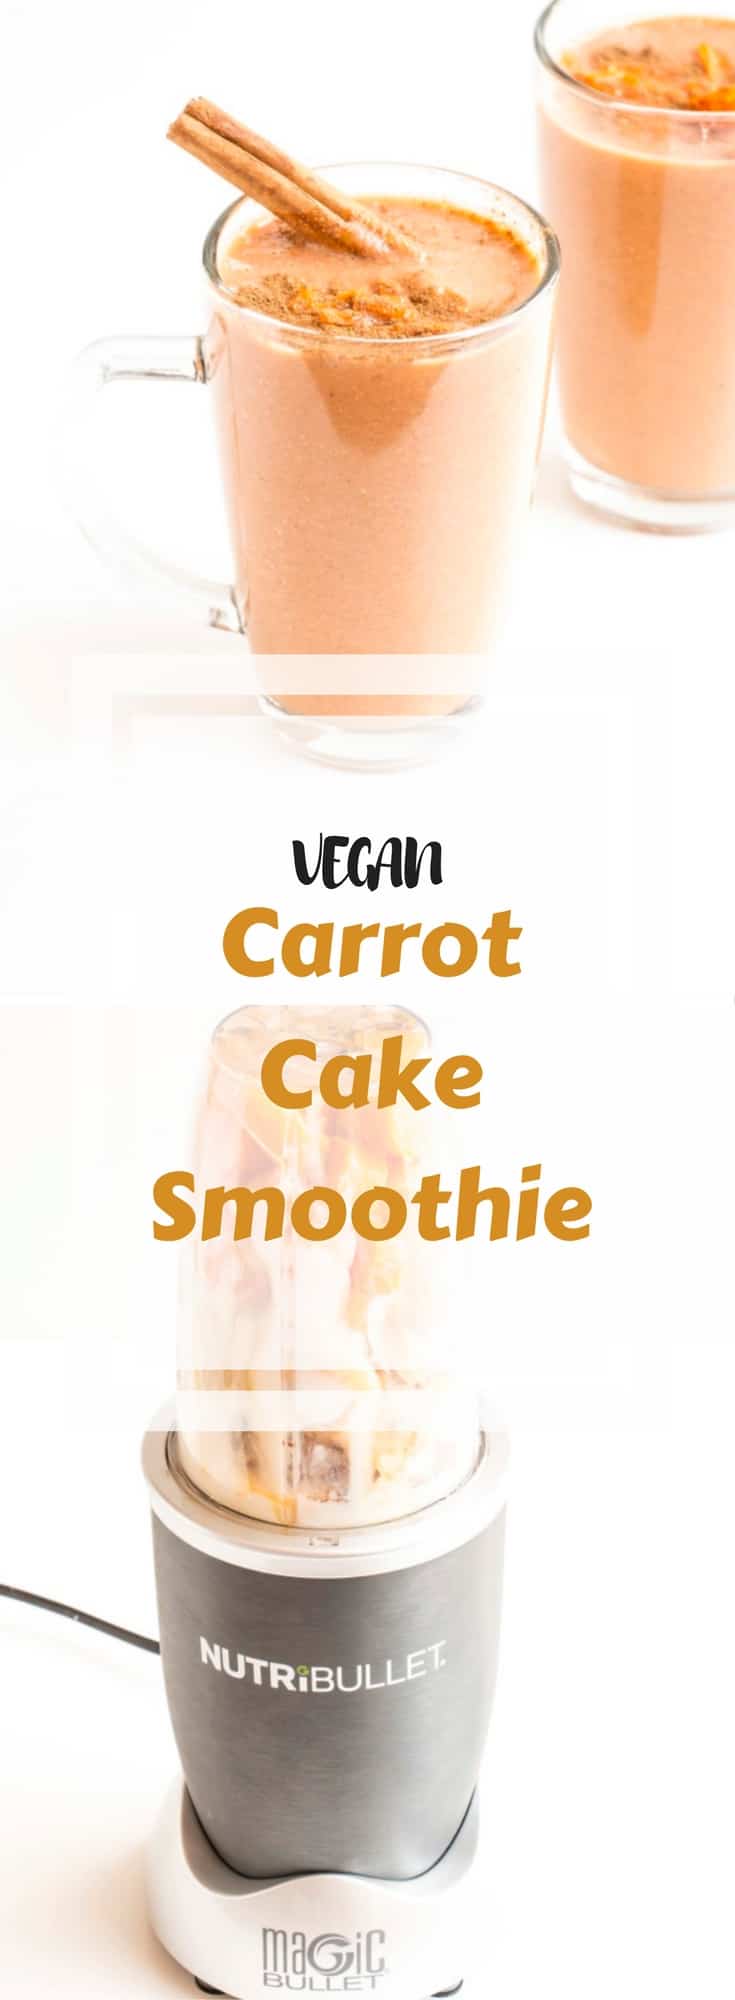 Easy to make vegan Healthy Carrot Cake Smoothie recipe Pin. The perfect on the go breakfast or snack. Made with fresh carrots and a variety of warm spices.